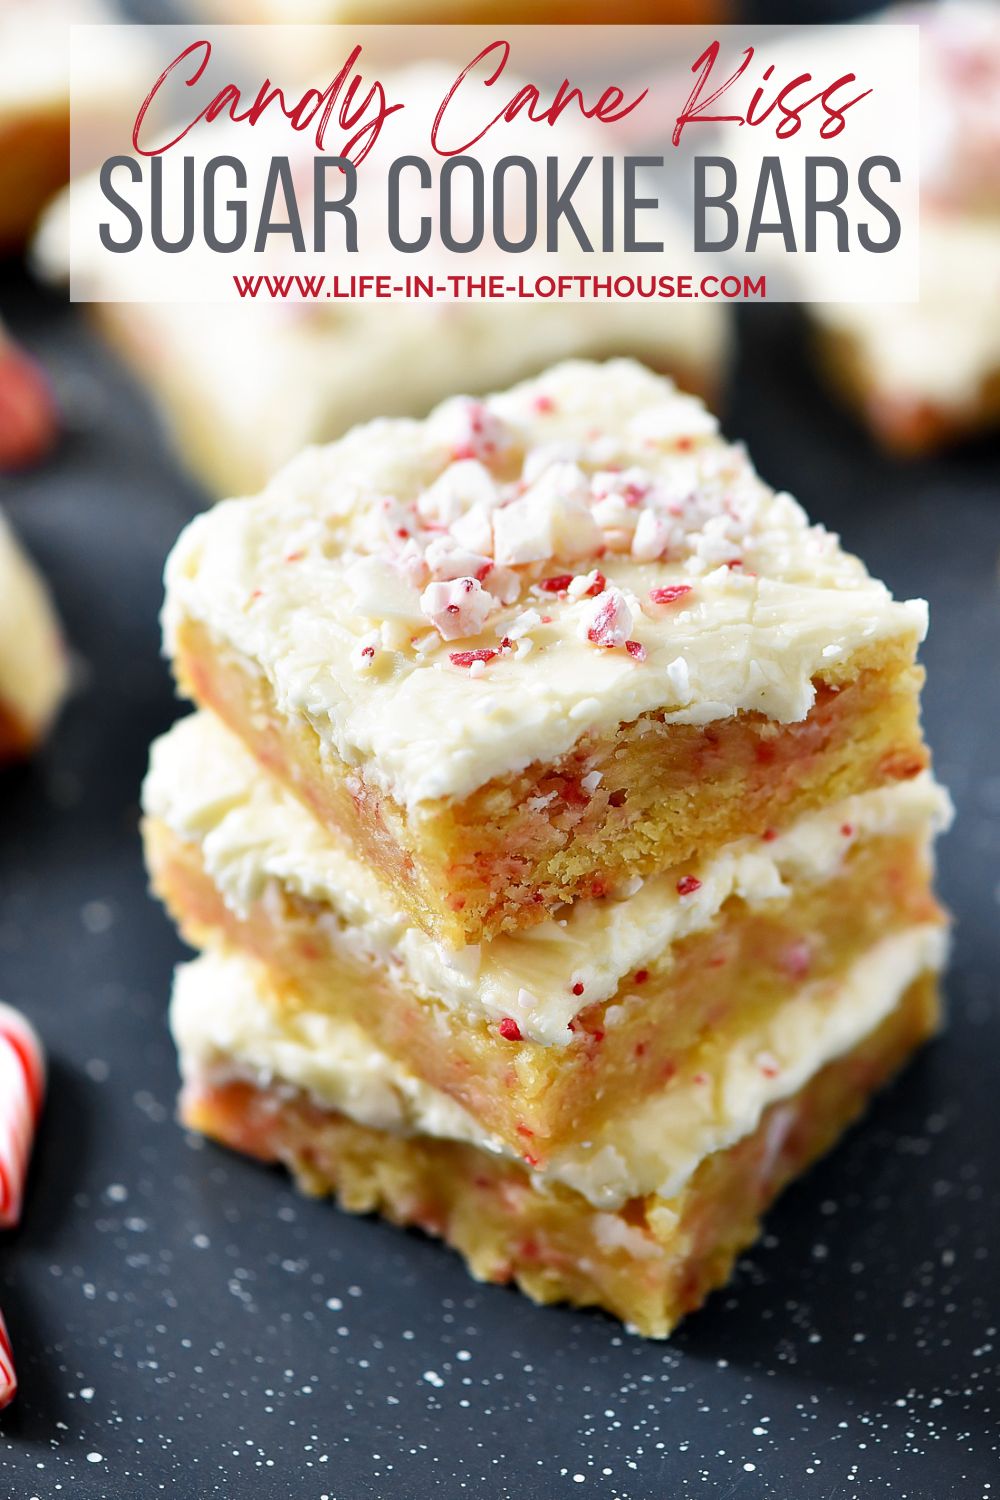 Delicious, soft sugar cookie bars filled and topped with candy cane Hershey kisses. Life-in-the-Lofthouse.com